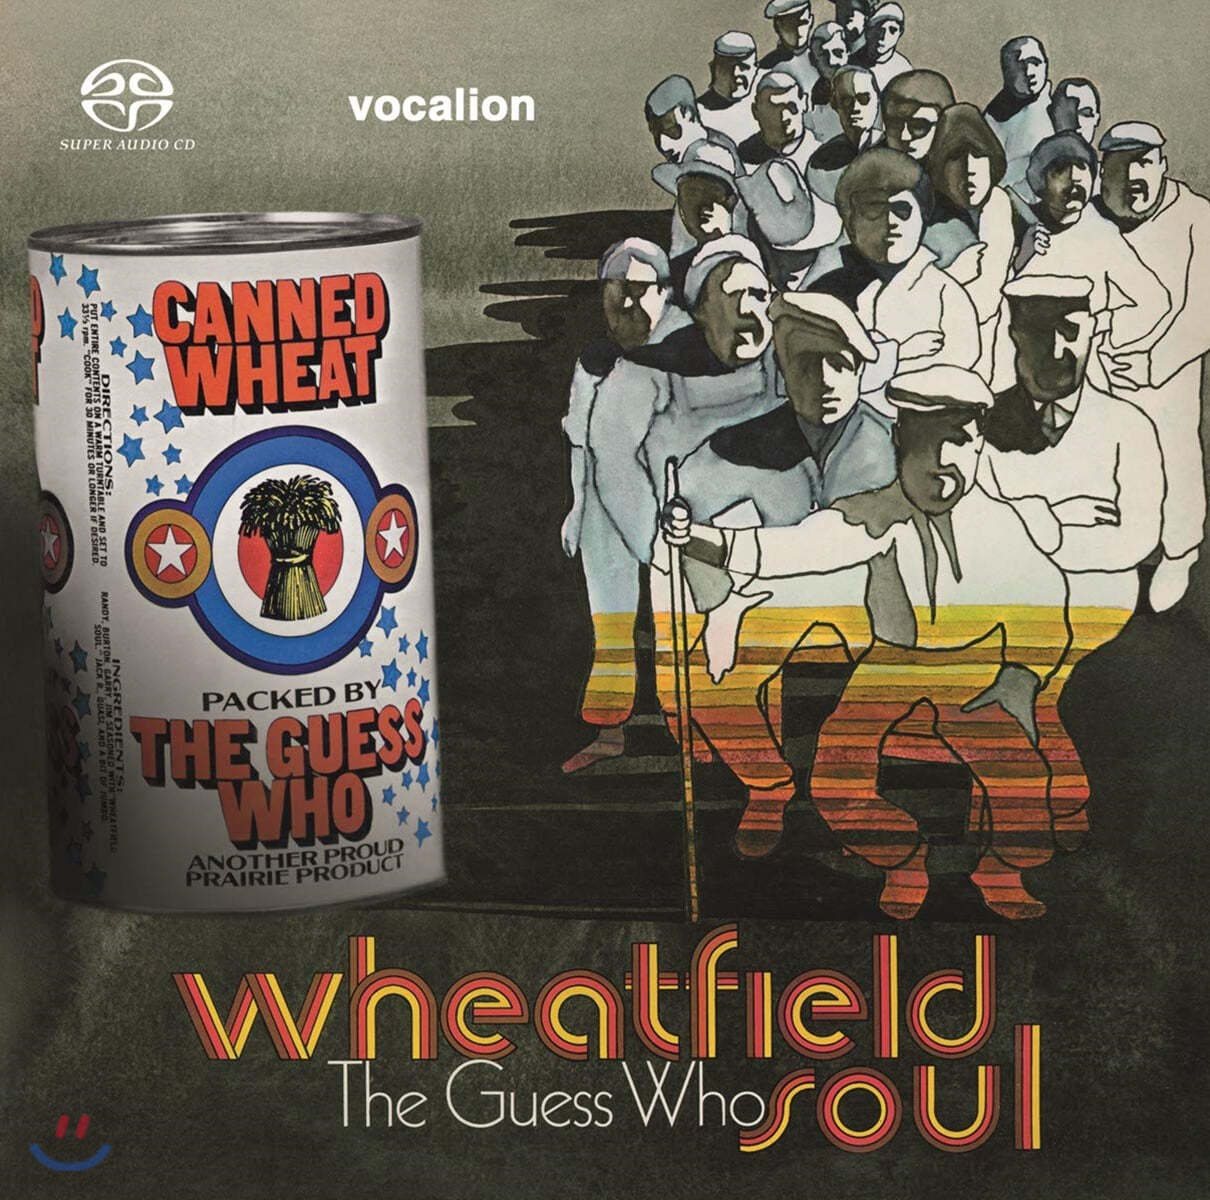 The Guess Who (더 게스 후) - Wheatfield Soul & Canned Wheat (Original Analog Remastered)